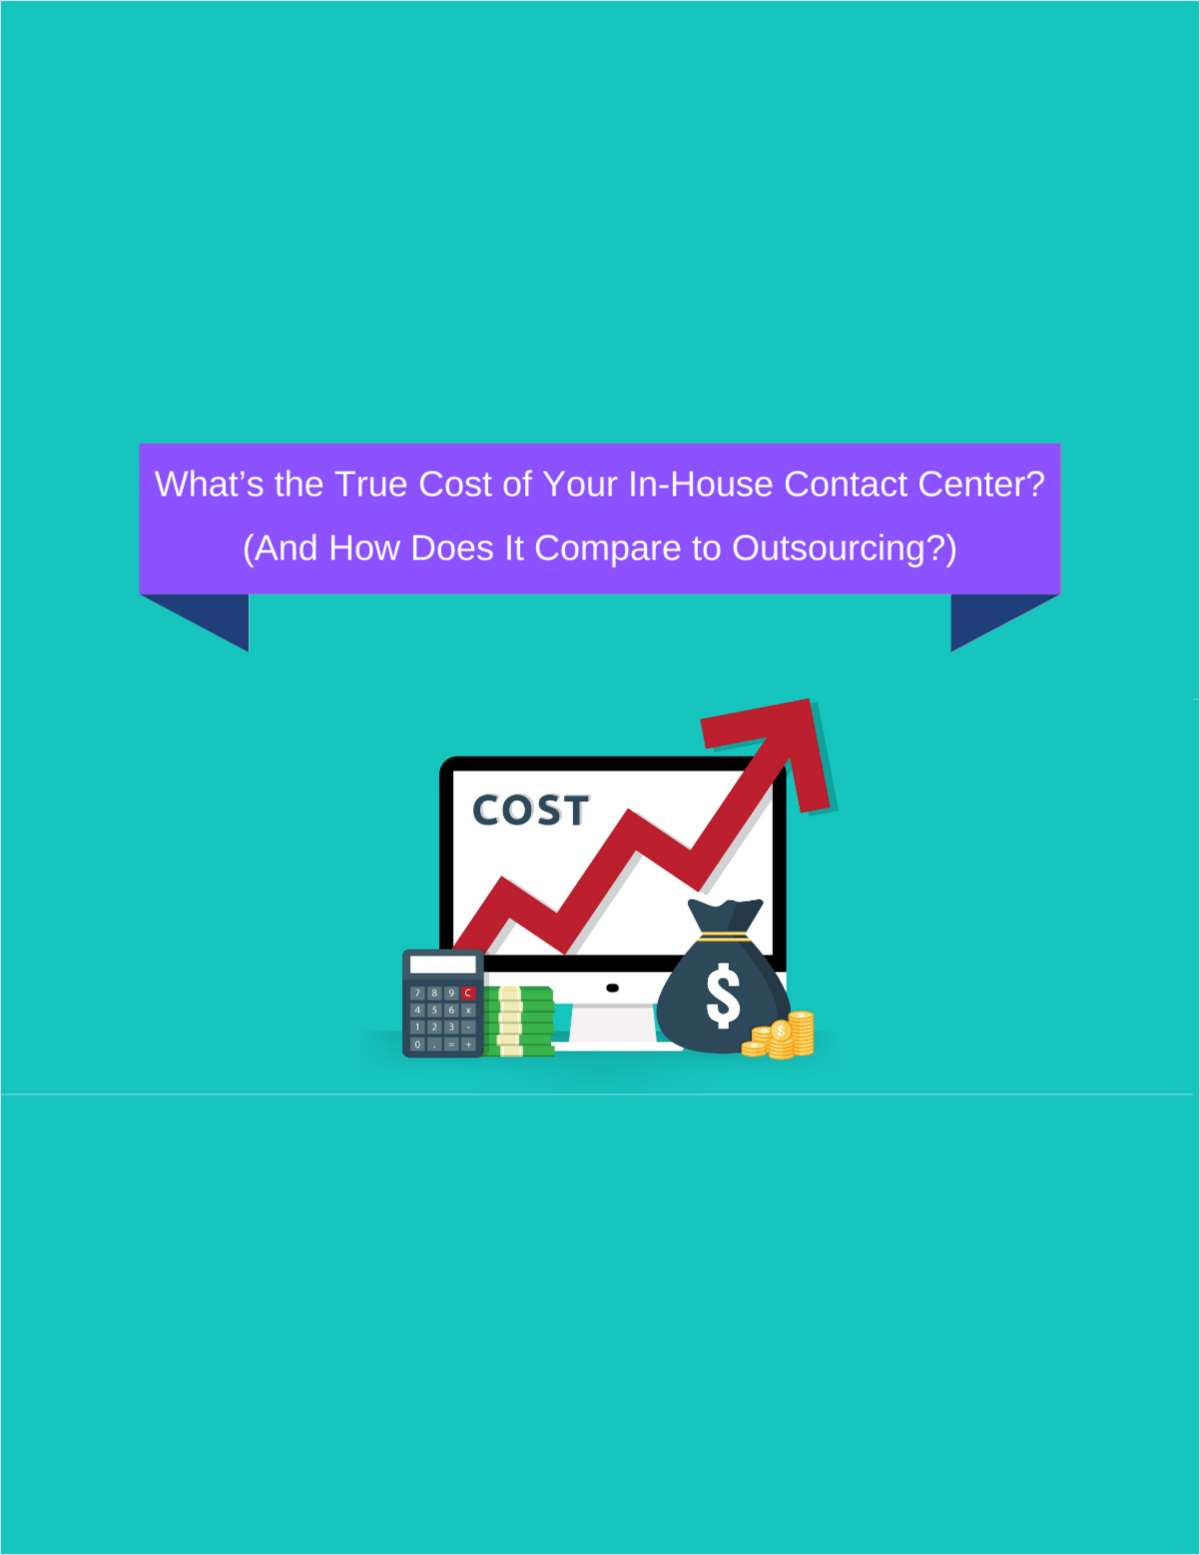 What's the True Cost of Your In-House Contact Center? (And How Does It Compare to Outsourcing?)